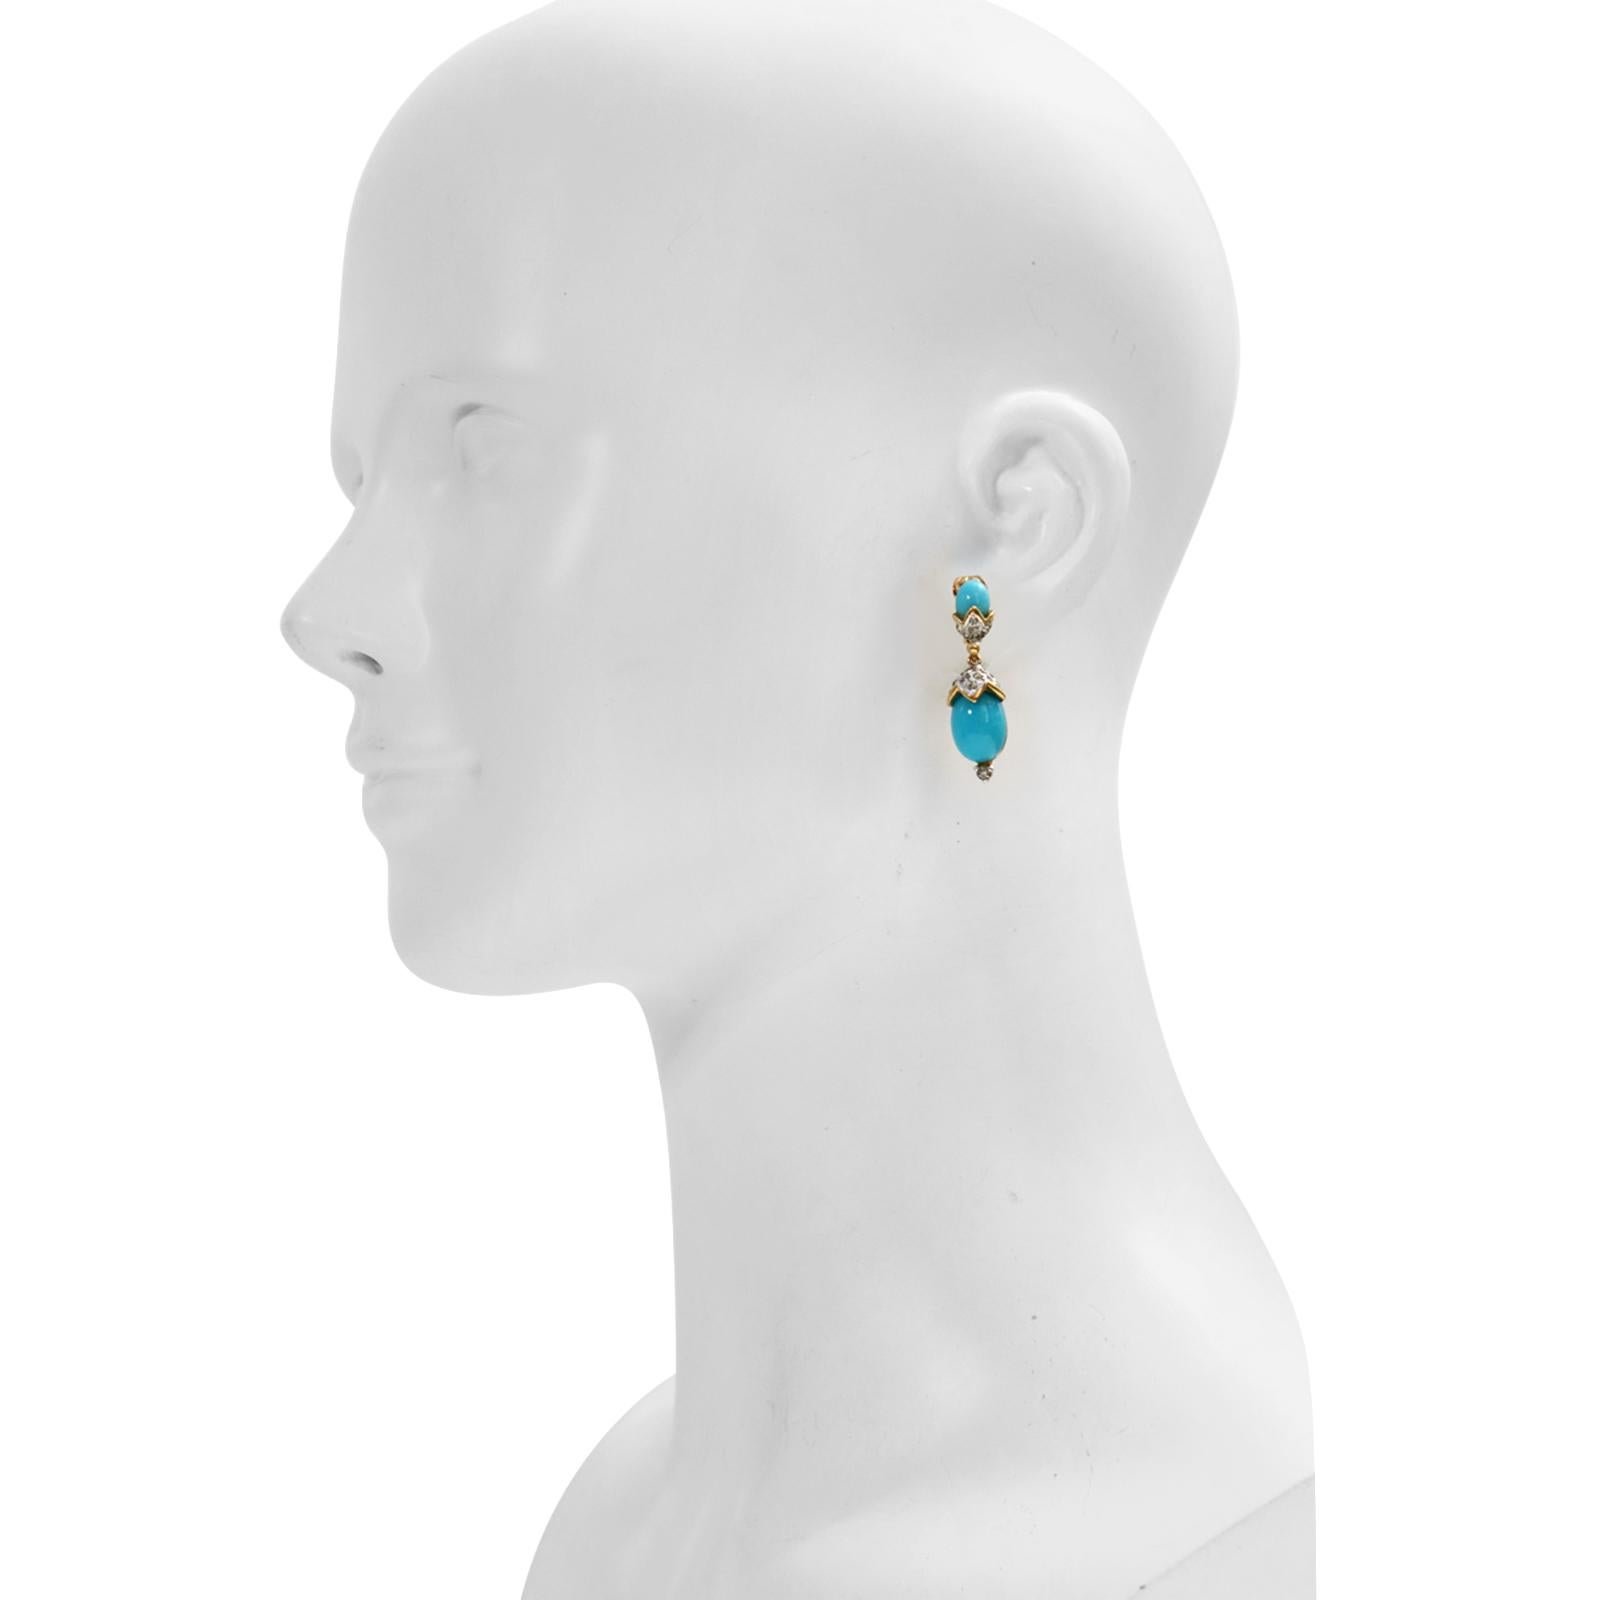 Vintage Panetta Faux Turquoise Dangling Earrings Circa 1980s For Sale 3